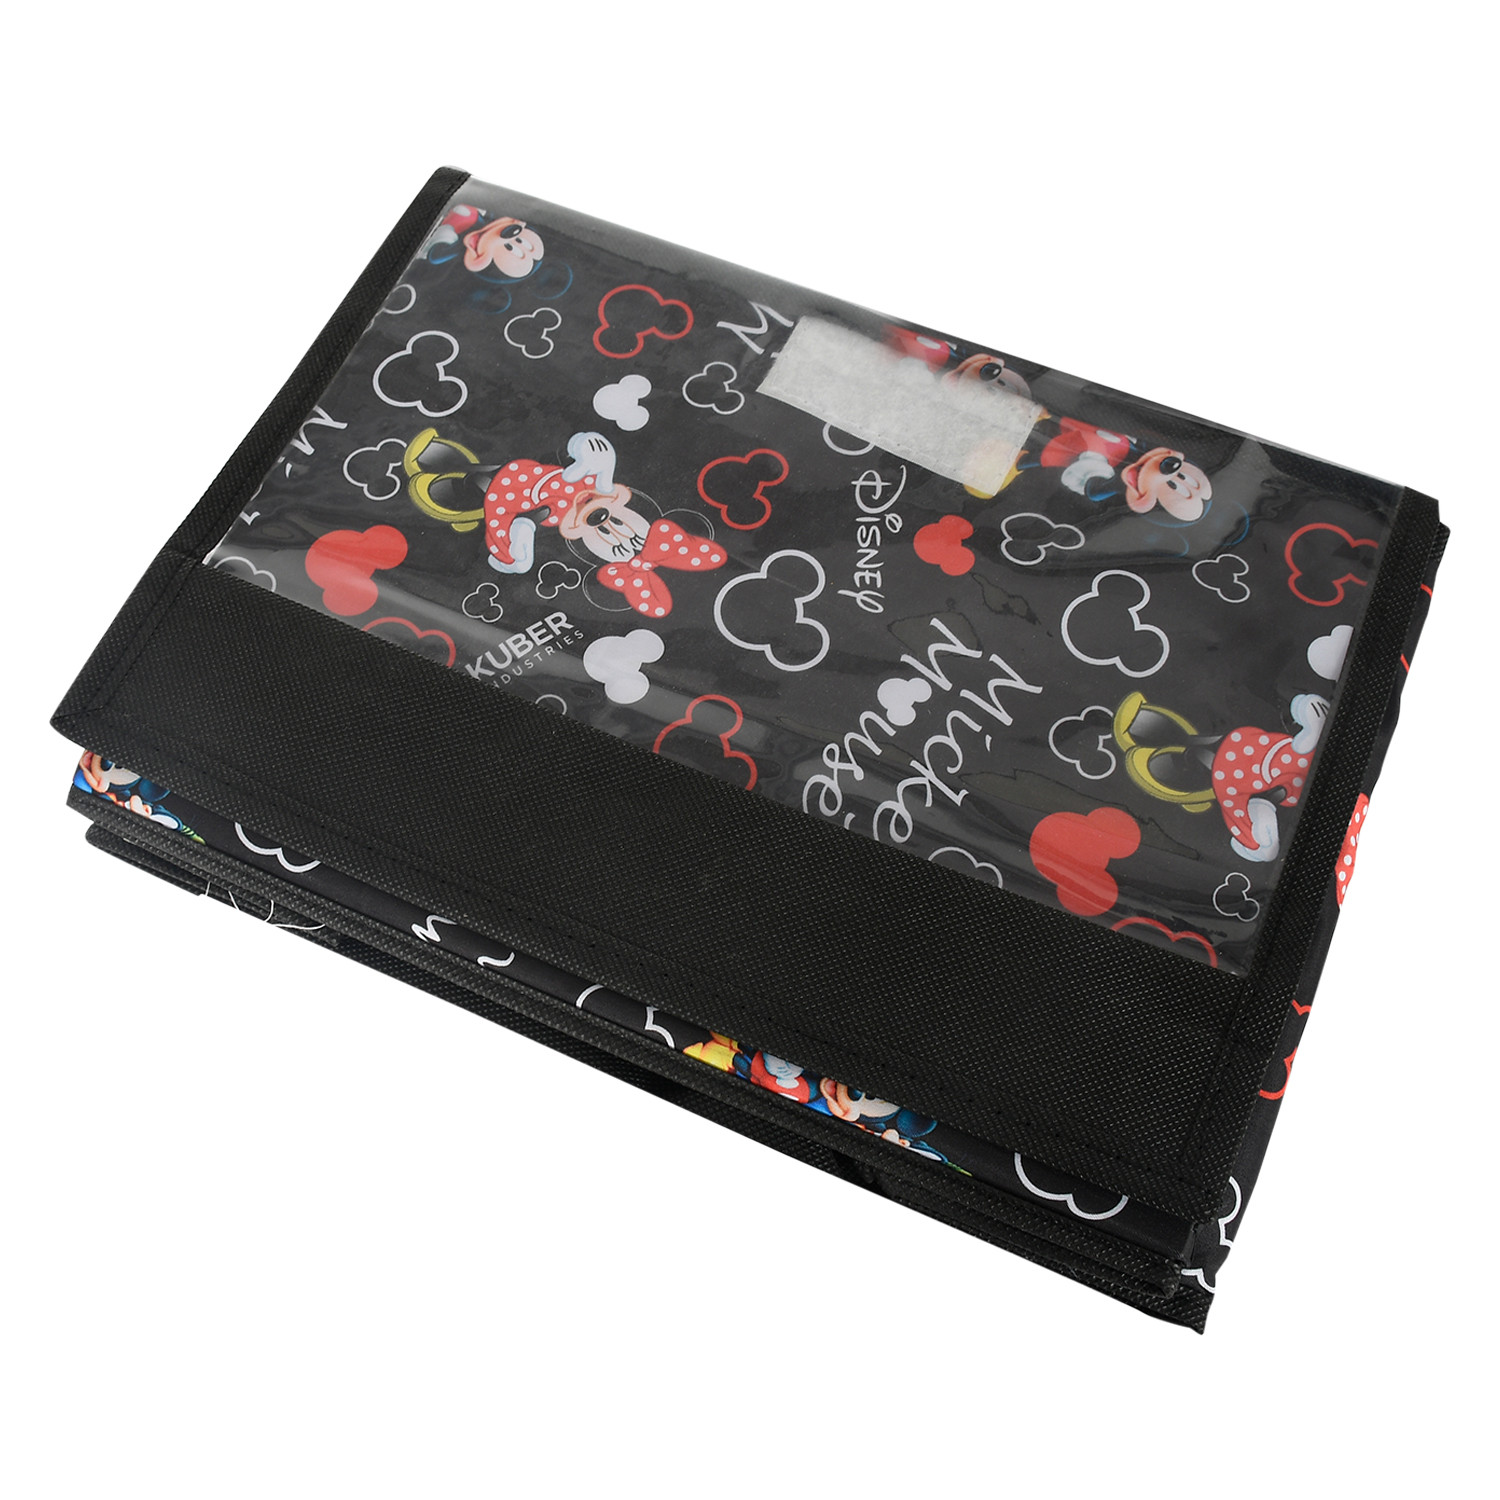 Kuber Industries Disney Minnie Storage Box|Non-Woven Foldable Large Storage Organizer for Toys|Cloths with Transparent Lid & Handle (Black)